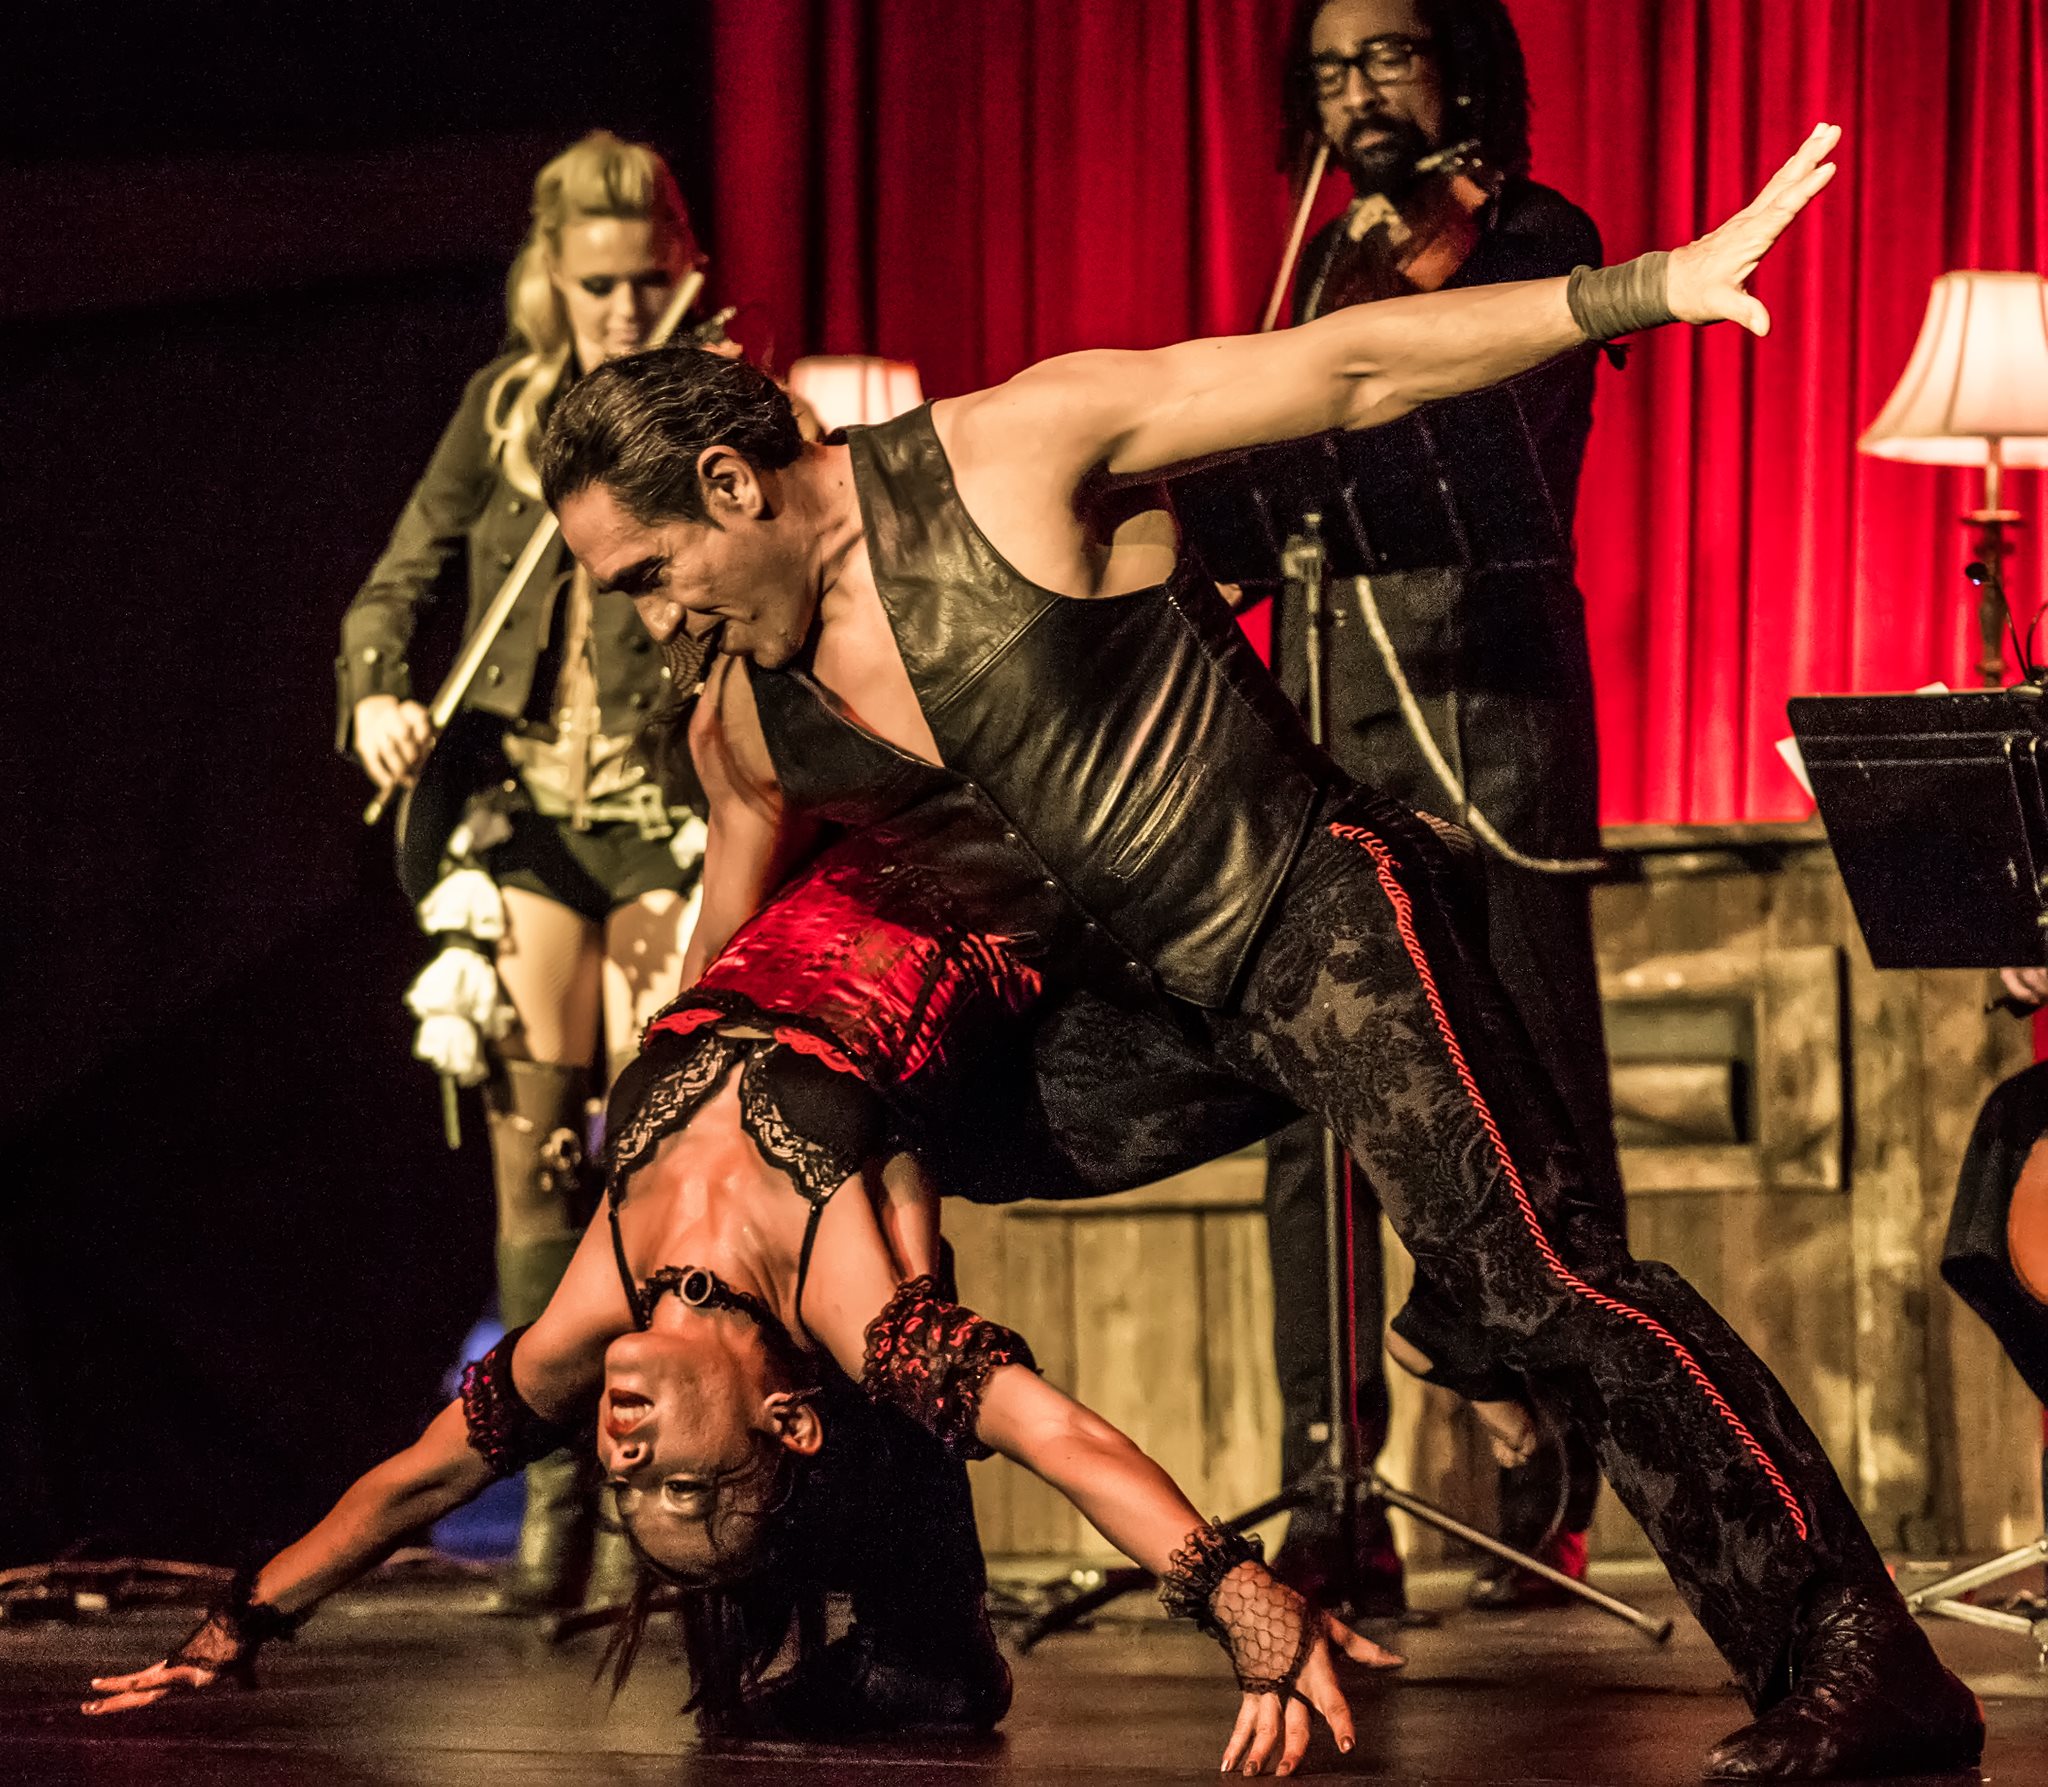 Image of Becca Feller and Miguel Balderrama performing at Vau de Vire's The Soiled Dove dinner theater Under the Tortona Big Top in Downtown Oakland